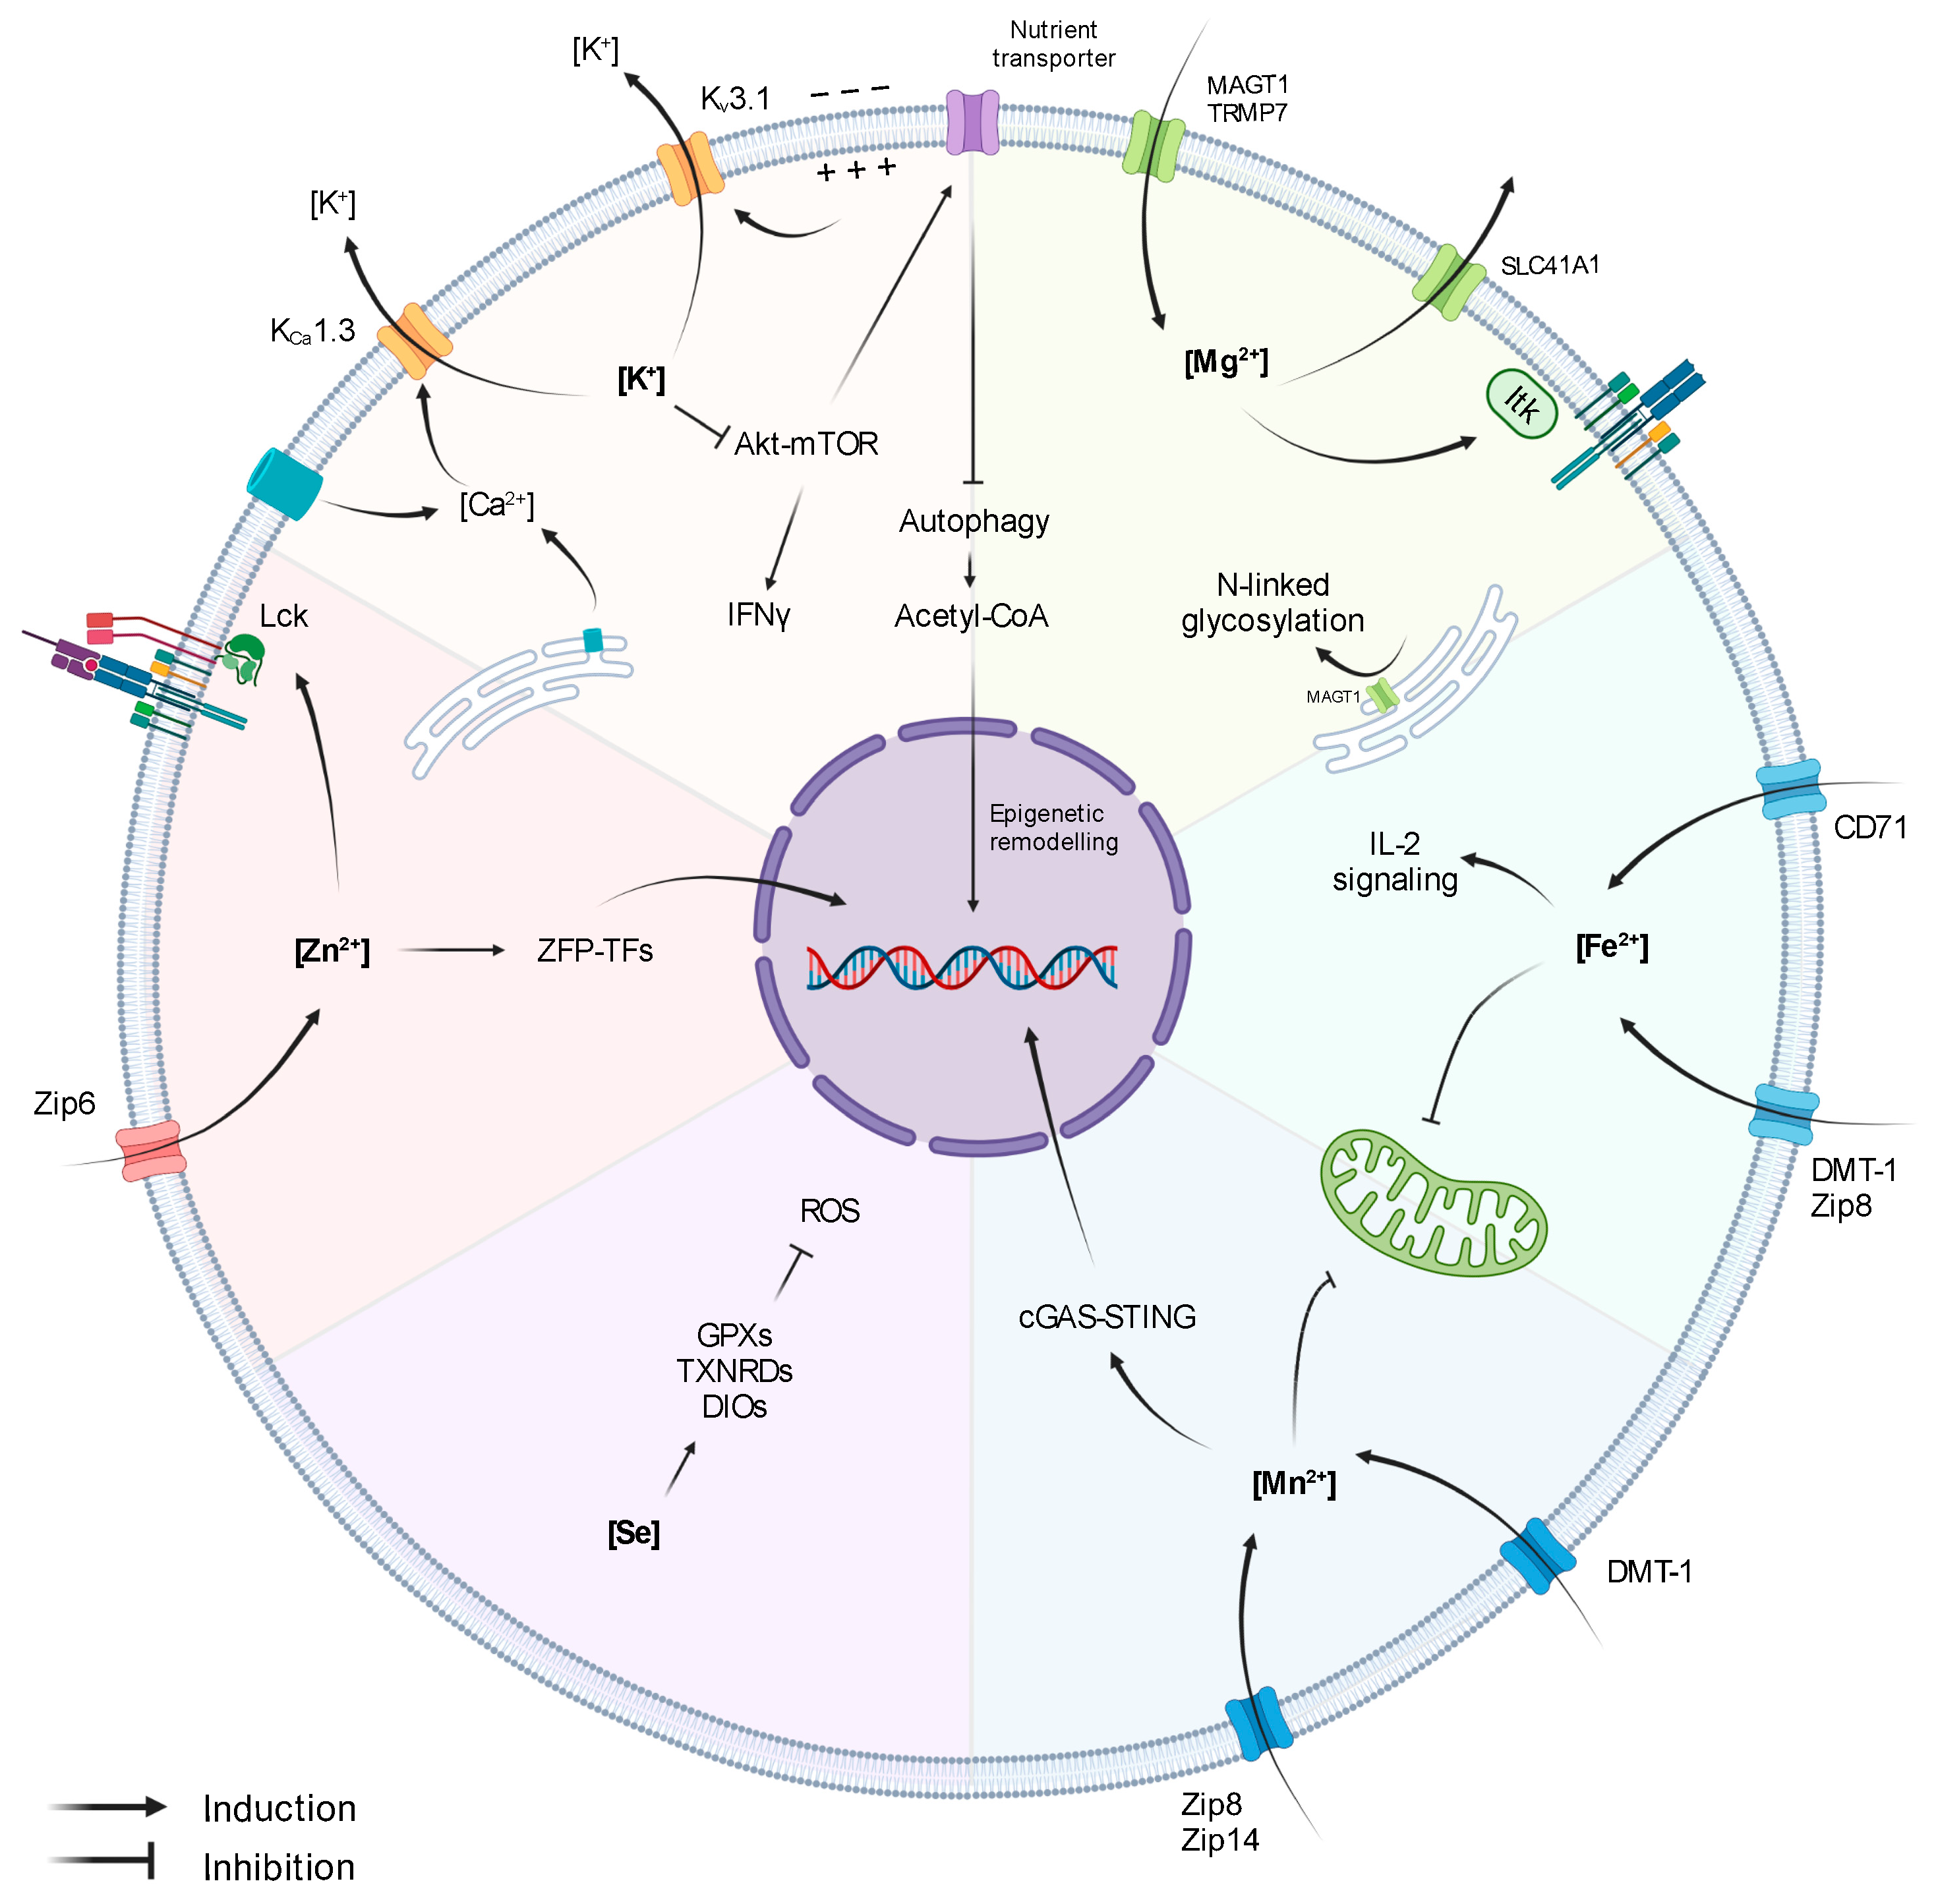 The role of ions in shaping the immune landscape of the